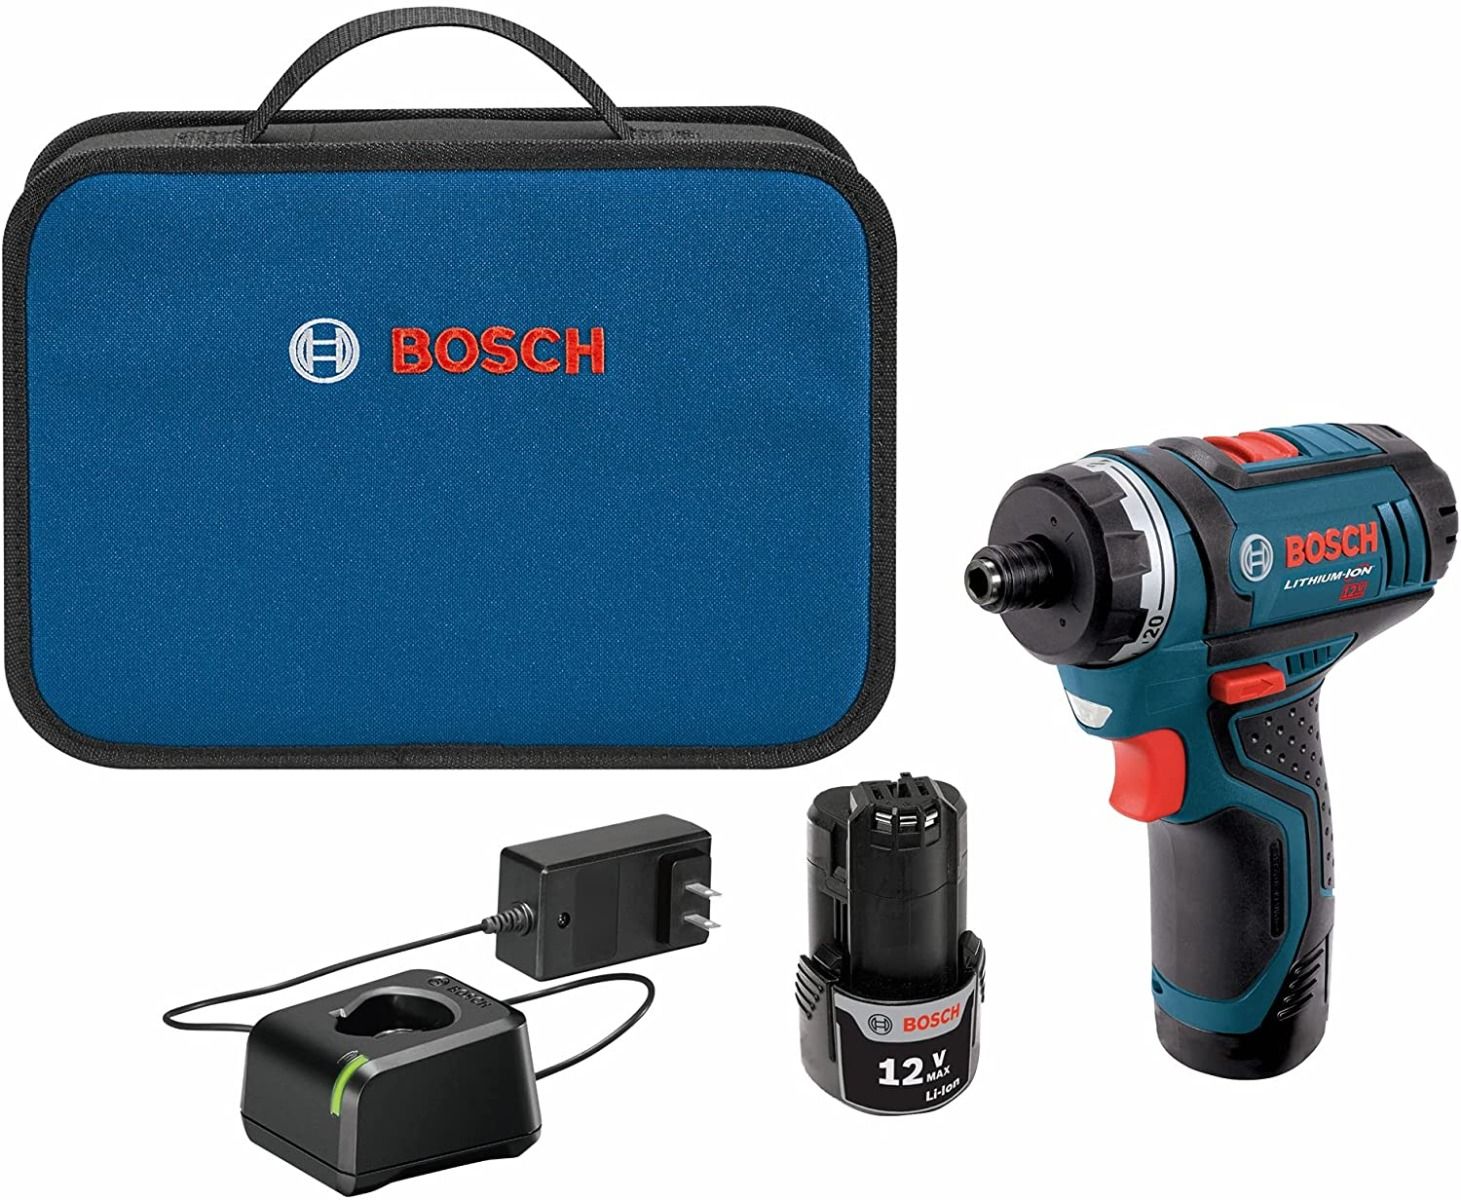 Bosch PS21-2A 12V MAX Two-Speed Pocket Driver Kit: Compact